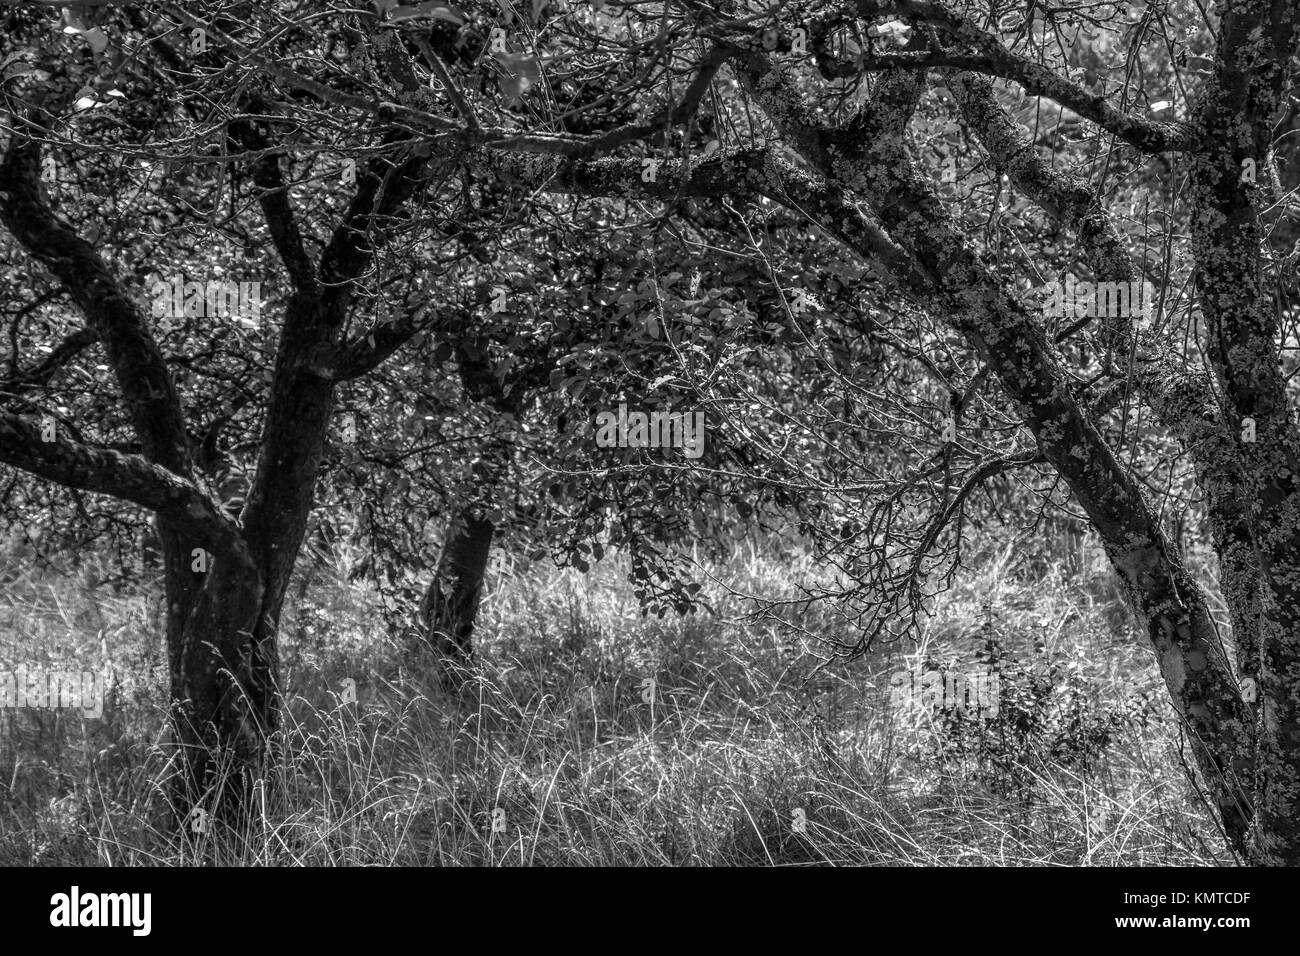 Wilderness in the garden with old apple trees and long dry grass Stock Photo